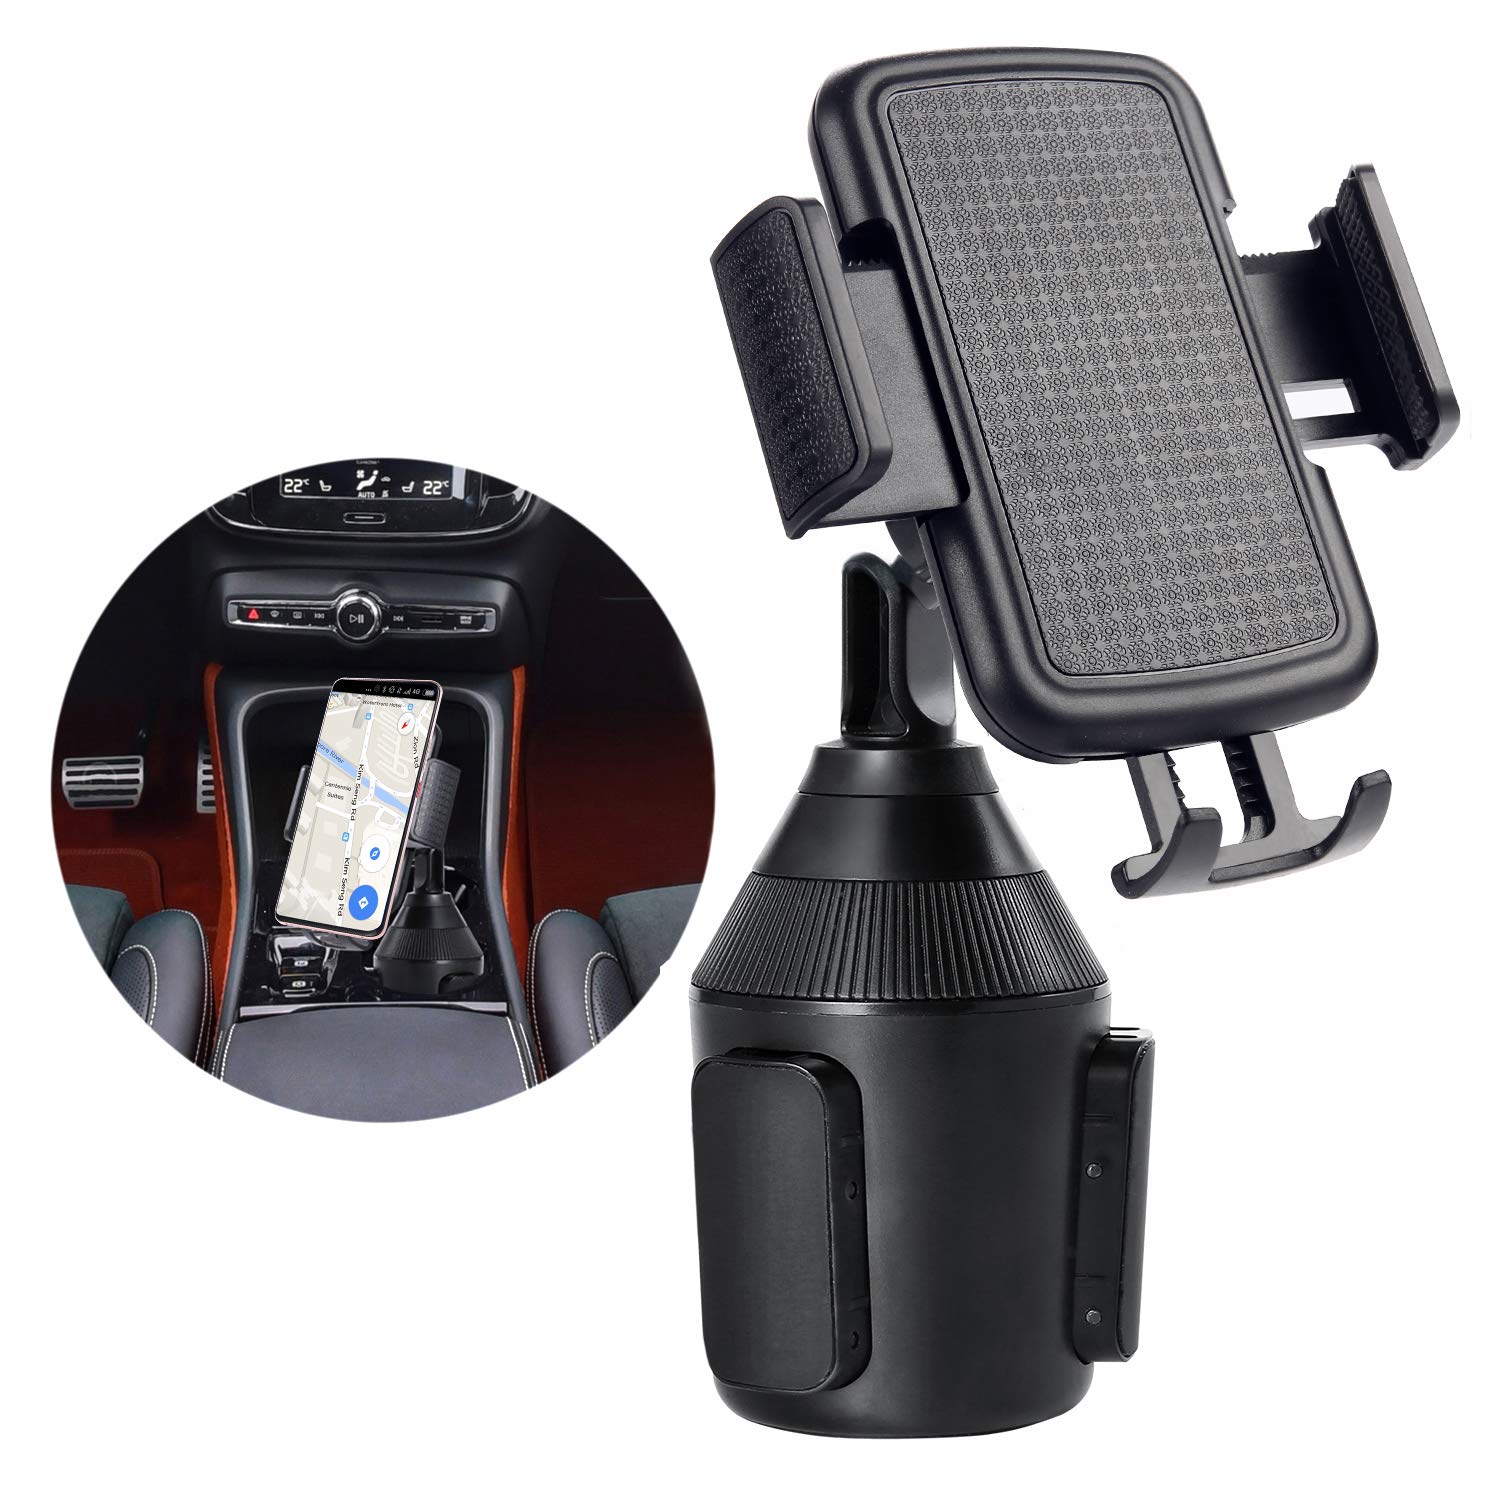 Cup Holder Phone Mount for Car Universal Adjustable Car Mount for iPhone 11 Pro Max/11 Pro/11/Xs/Max/X/XR/8/8/7/6 Plus,Note 10/Note 10+/Note 9/ S10+/ S10/ S9/ S9+/ S8 - image 1 of 6